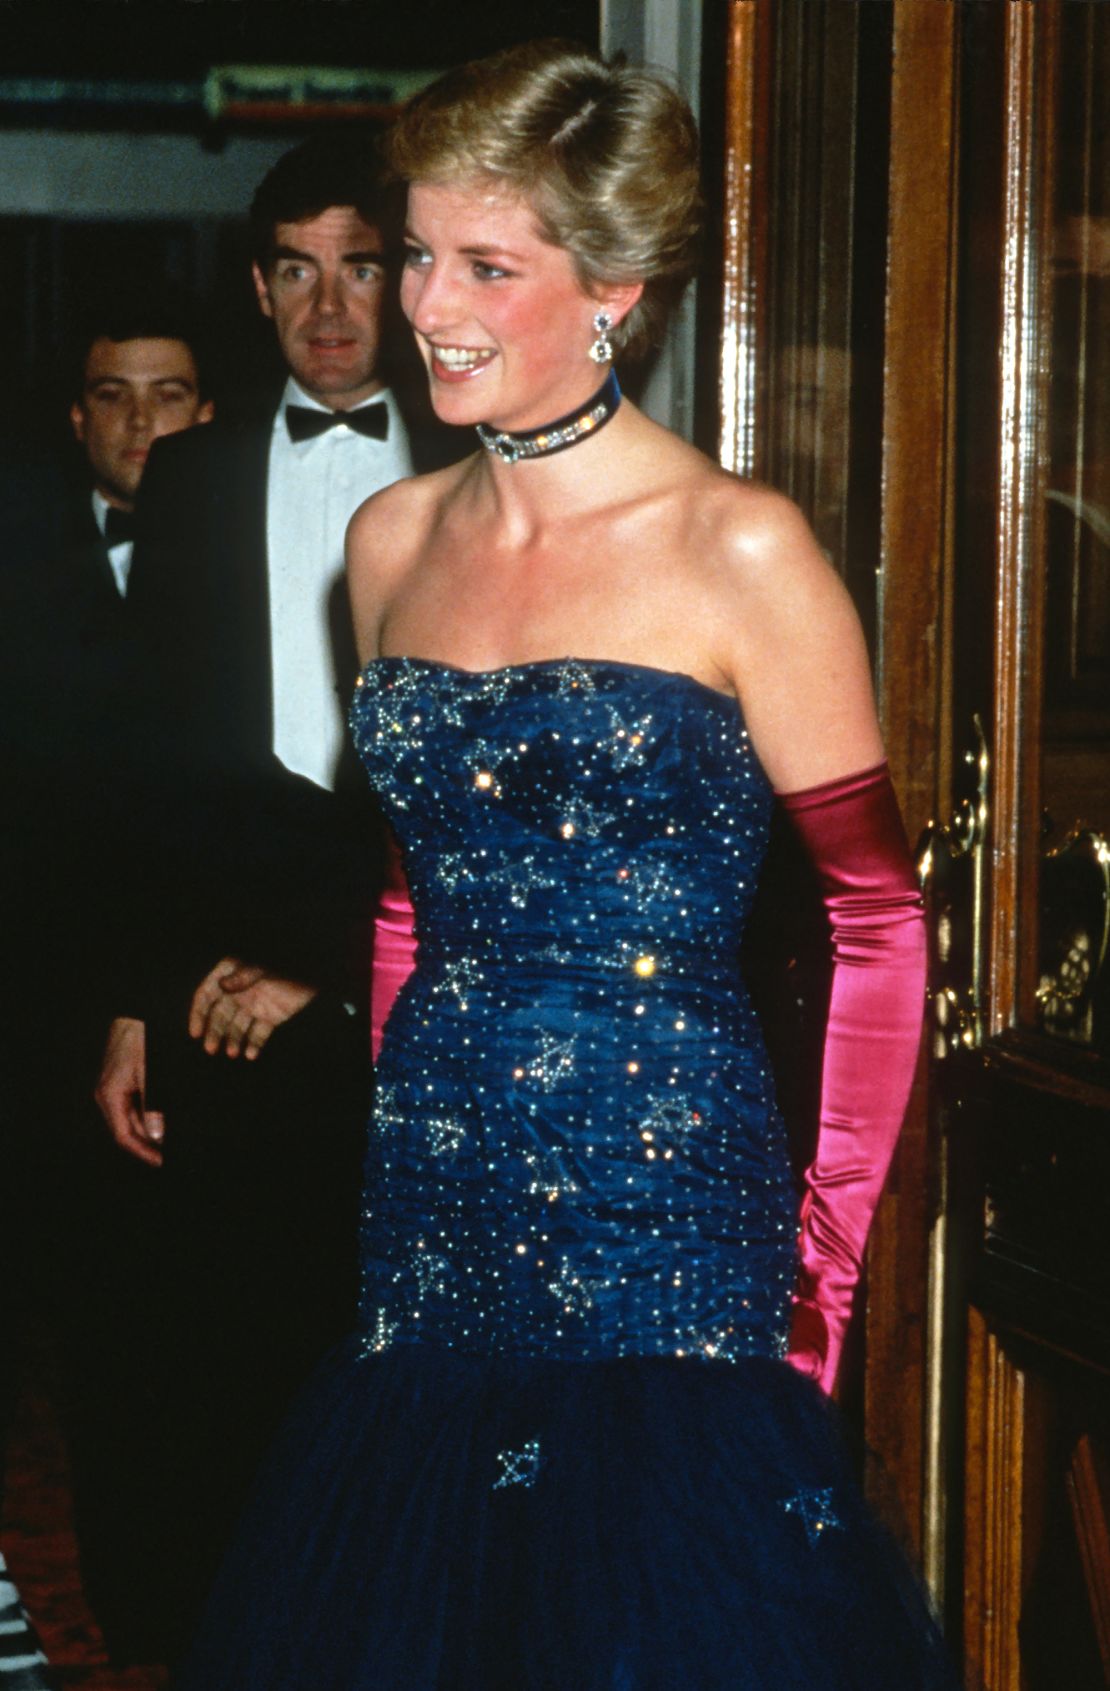 Diana wore this tulle gown to the premiere of "The Phantom of the Opera."